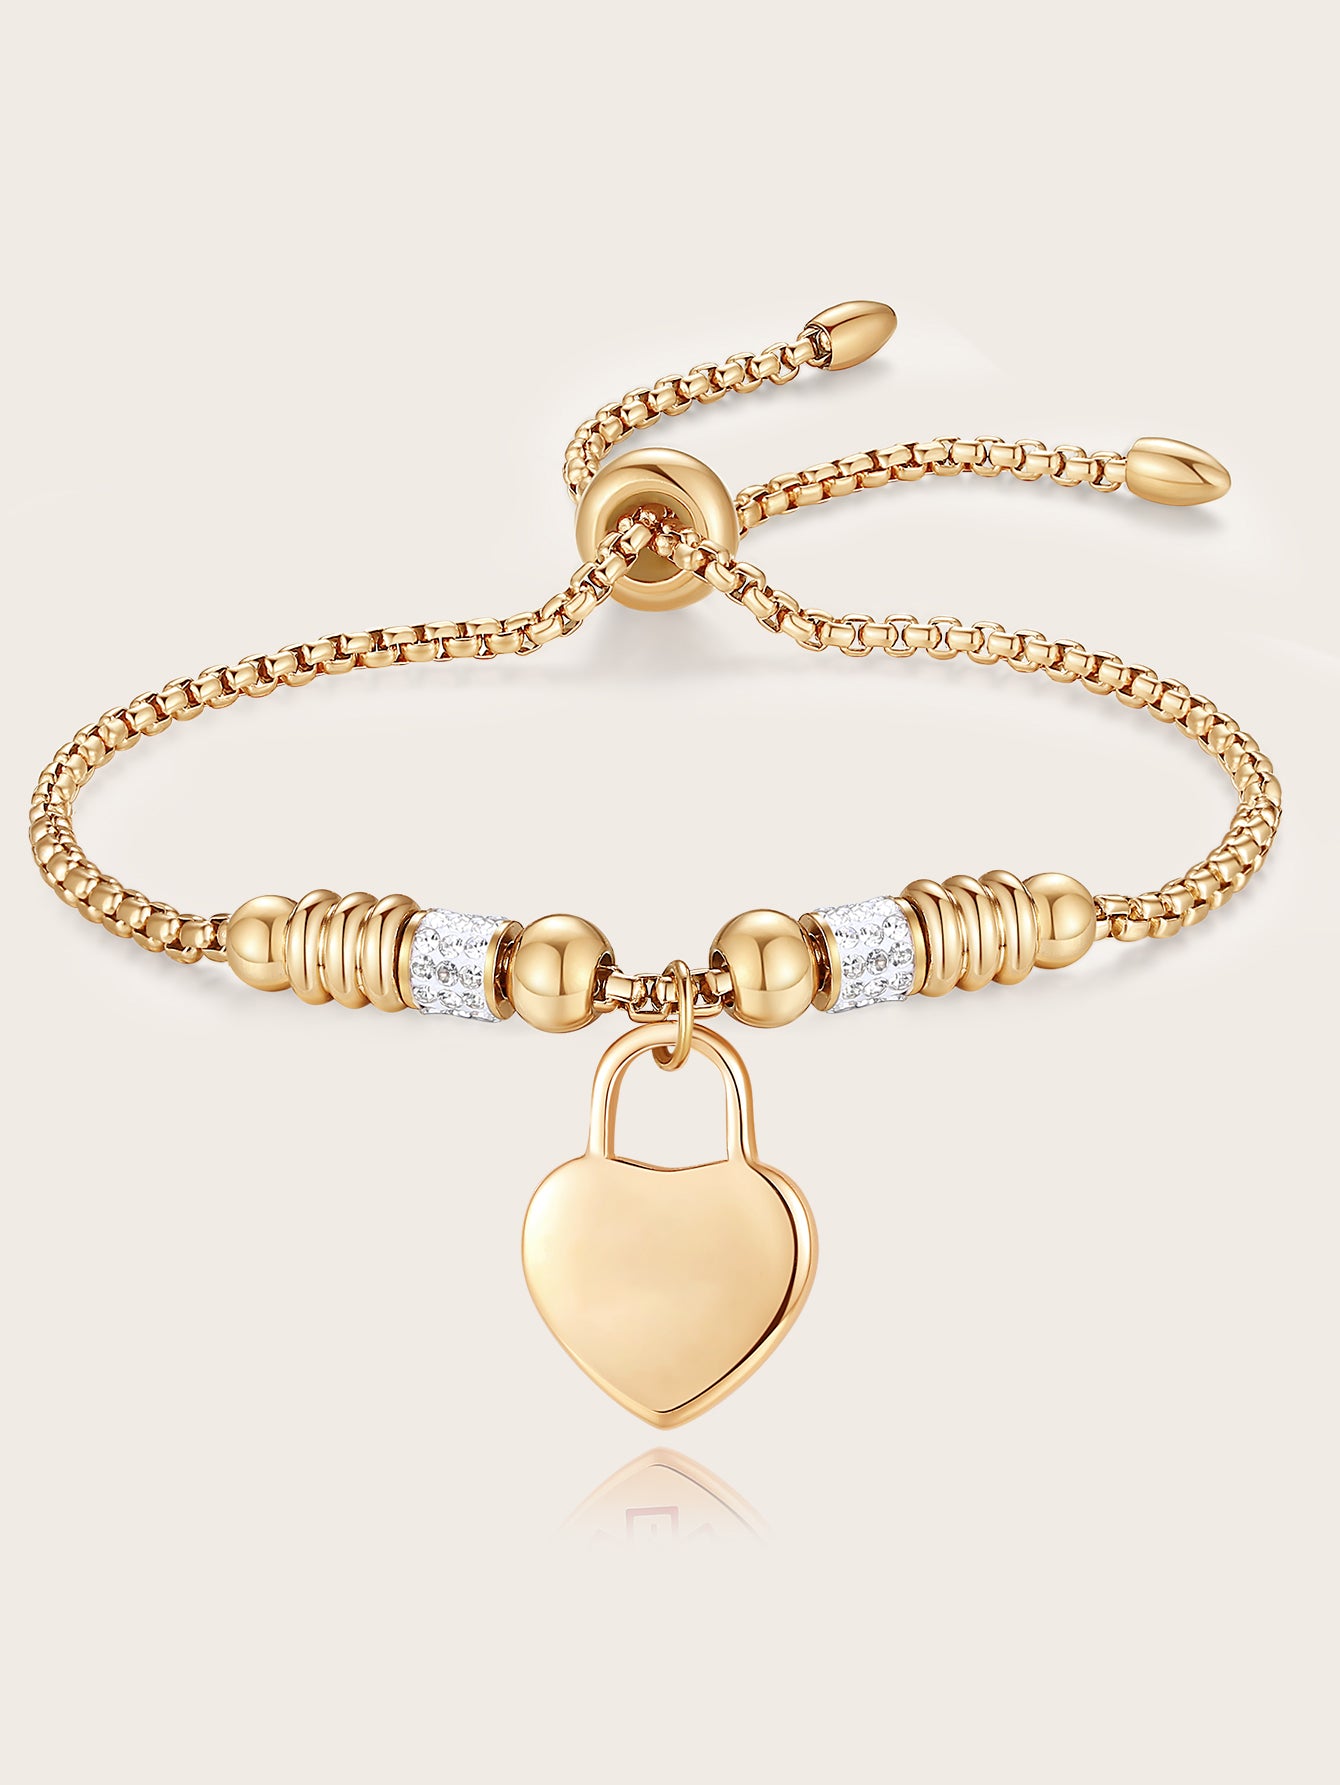 Exquisite Stainless Steel Heart Cross Bracelet - A Thoughtful Religious Gift for Women, Ideal for Christmas and New Year's Celebrations